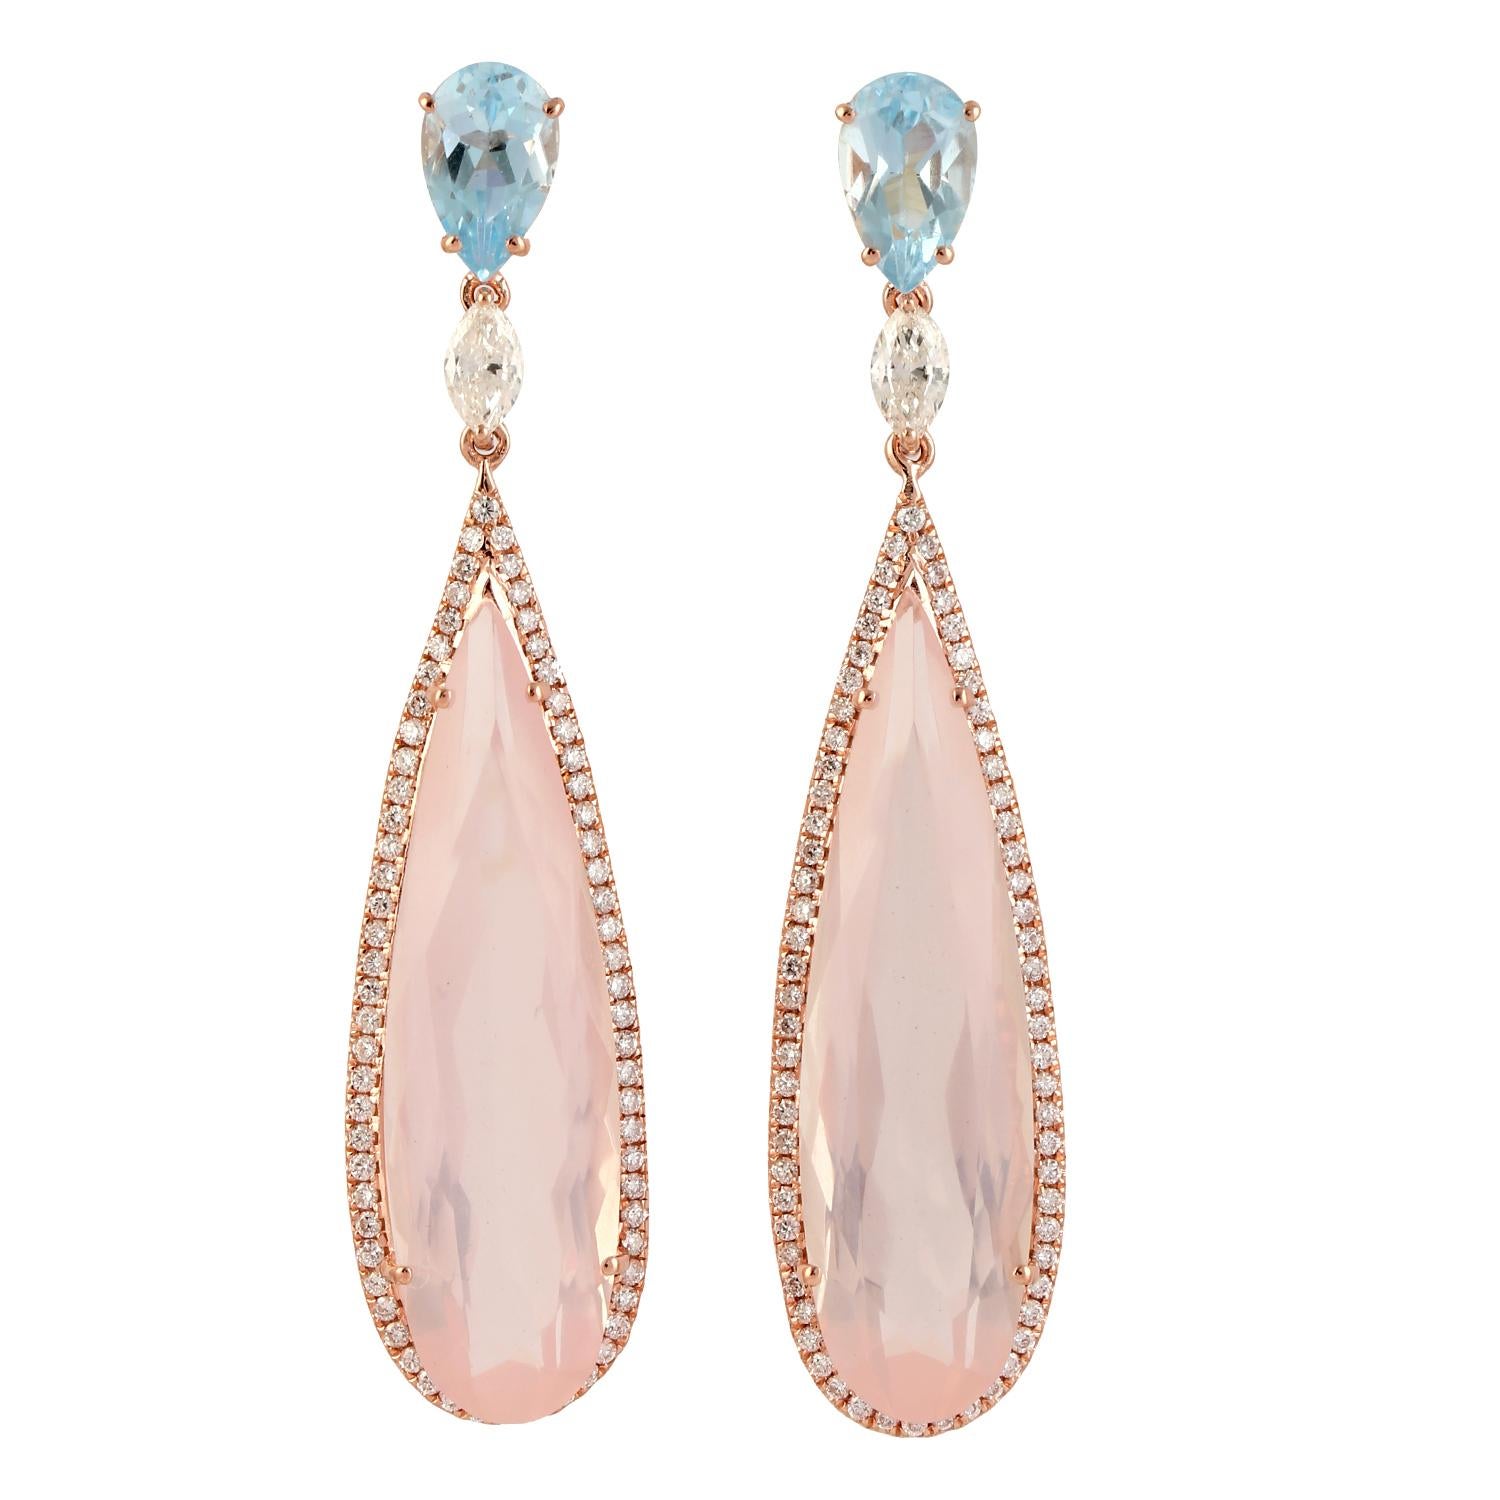 These beautiful earrings are cast in 14-karat gold. It is handset in 15.79 carats rose quartz, 2.26 carats topaz and illuminated with .90 carats of glittering diamonds. 

The ring is a size 7 and may be resized to larger or smaller upon request.